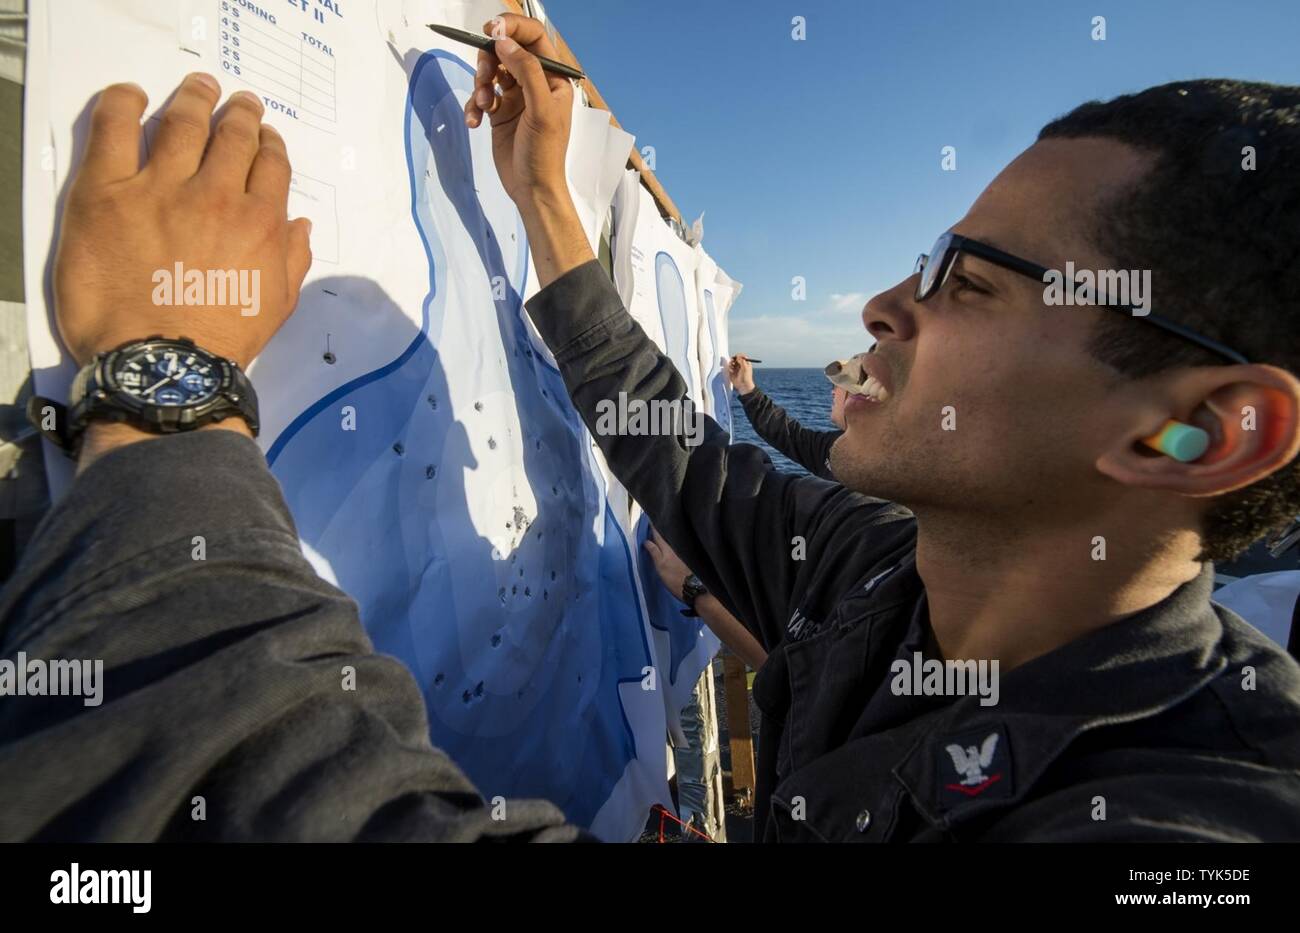 PACIFIC OCEAN (Nov. 13, 2016) Petty Officer 3rd Class Julio Vargaskercado adds up a Sailor's score during a small-arms shoot on the flight deck of the Ticonderoga-class guided-missile class cruiser USS Lake Champlain (CG 57). Lake Champlain is underway with Carrier Strike Group One conducting Composite Training Unit Exercise in preparation for a future deployment. Stock Photo